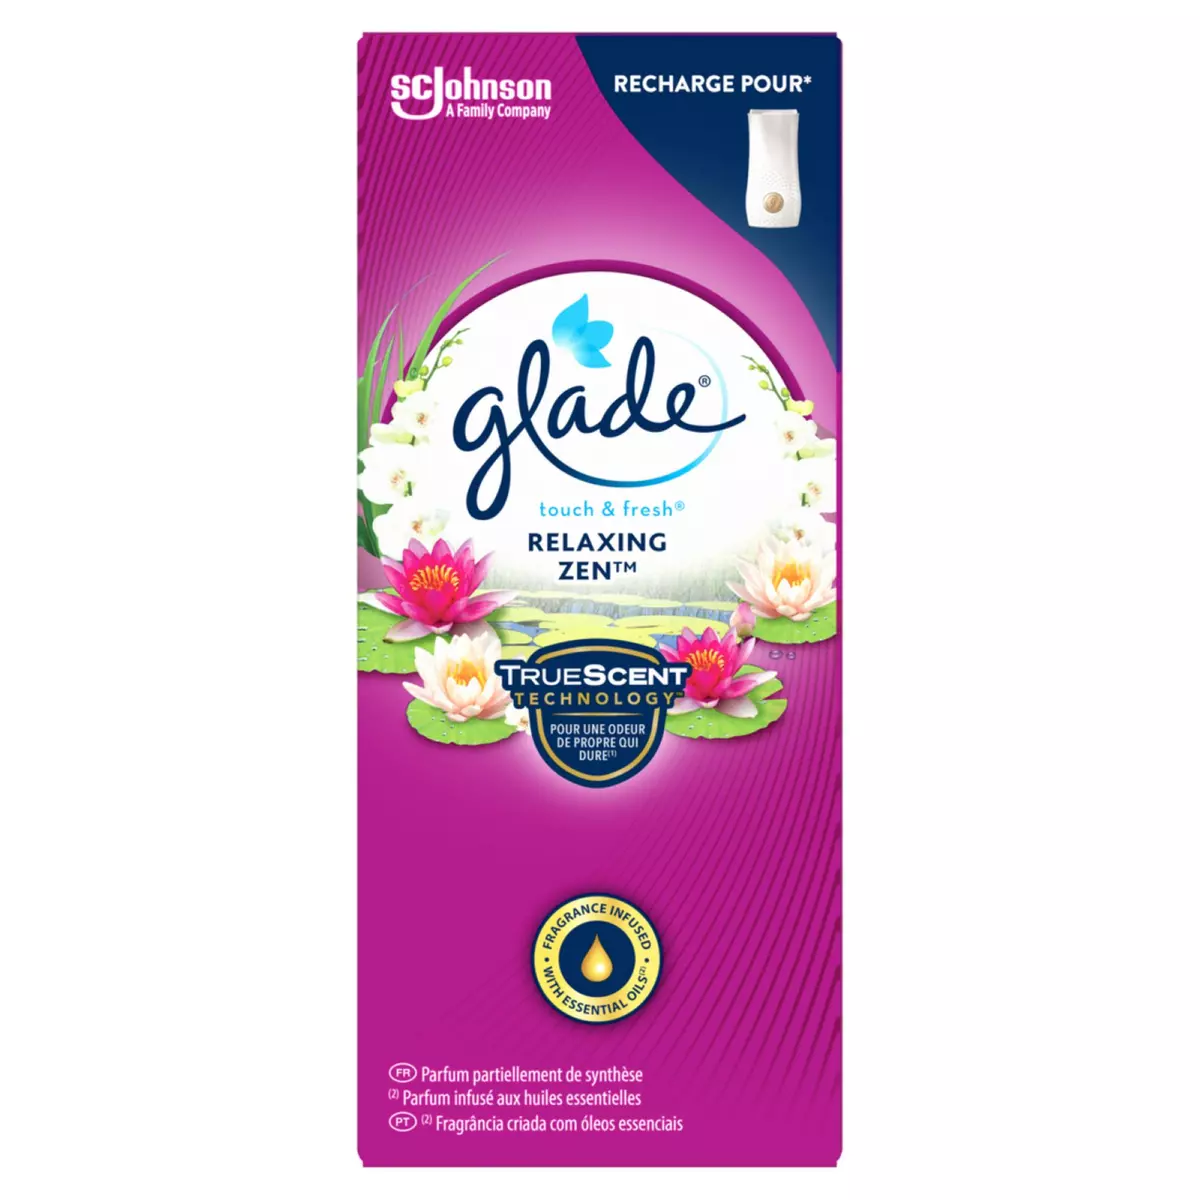 GLADE Touch & Fresh recharge pour diffuseur zen relaxing 10ml